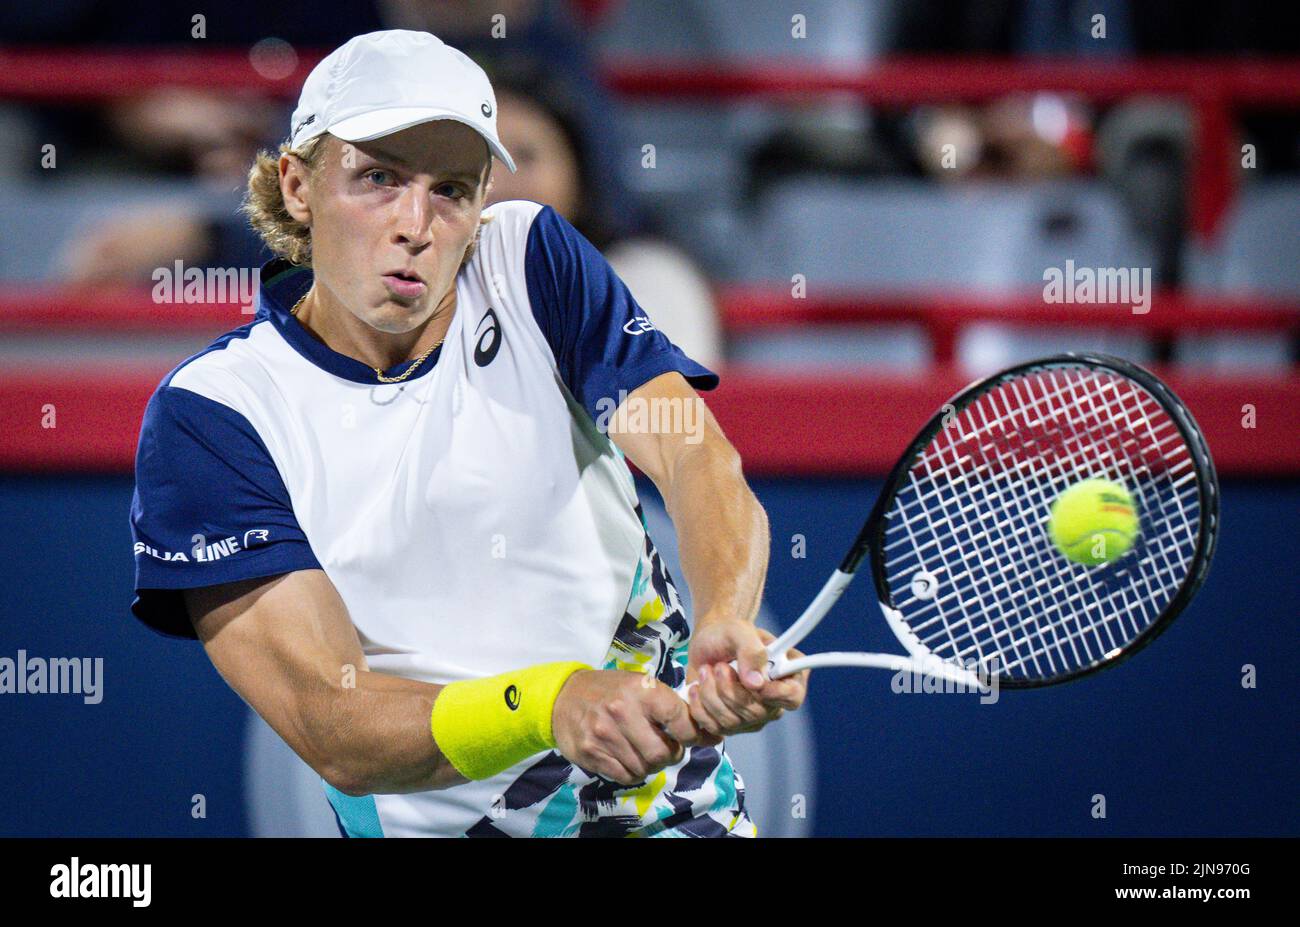 Emil Ruusuvuori of Finland hits a shot during his match against Hubert Hurkacz of Poland at the National Bank Open at Stade IGA on August 8, 2022 in Montreal, Canada. Montreal, Quebec, Canada August 8, 2022. (Photo by Mathieu Belanger/AFLO) Stock Photo